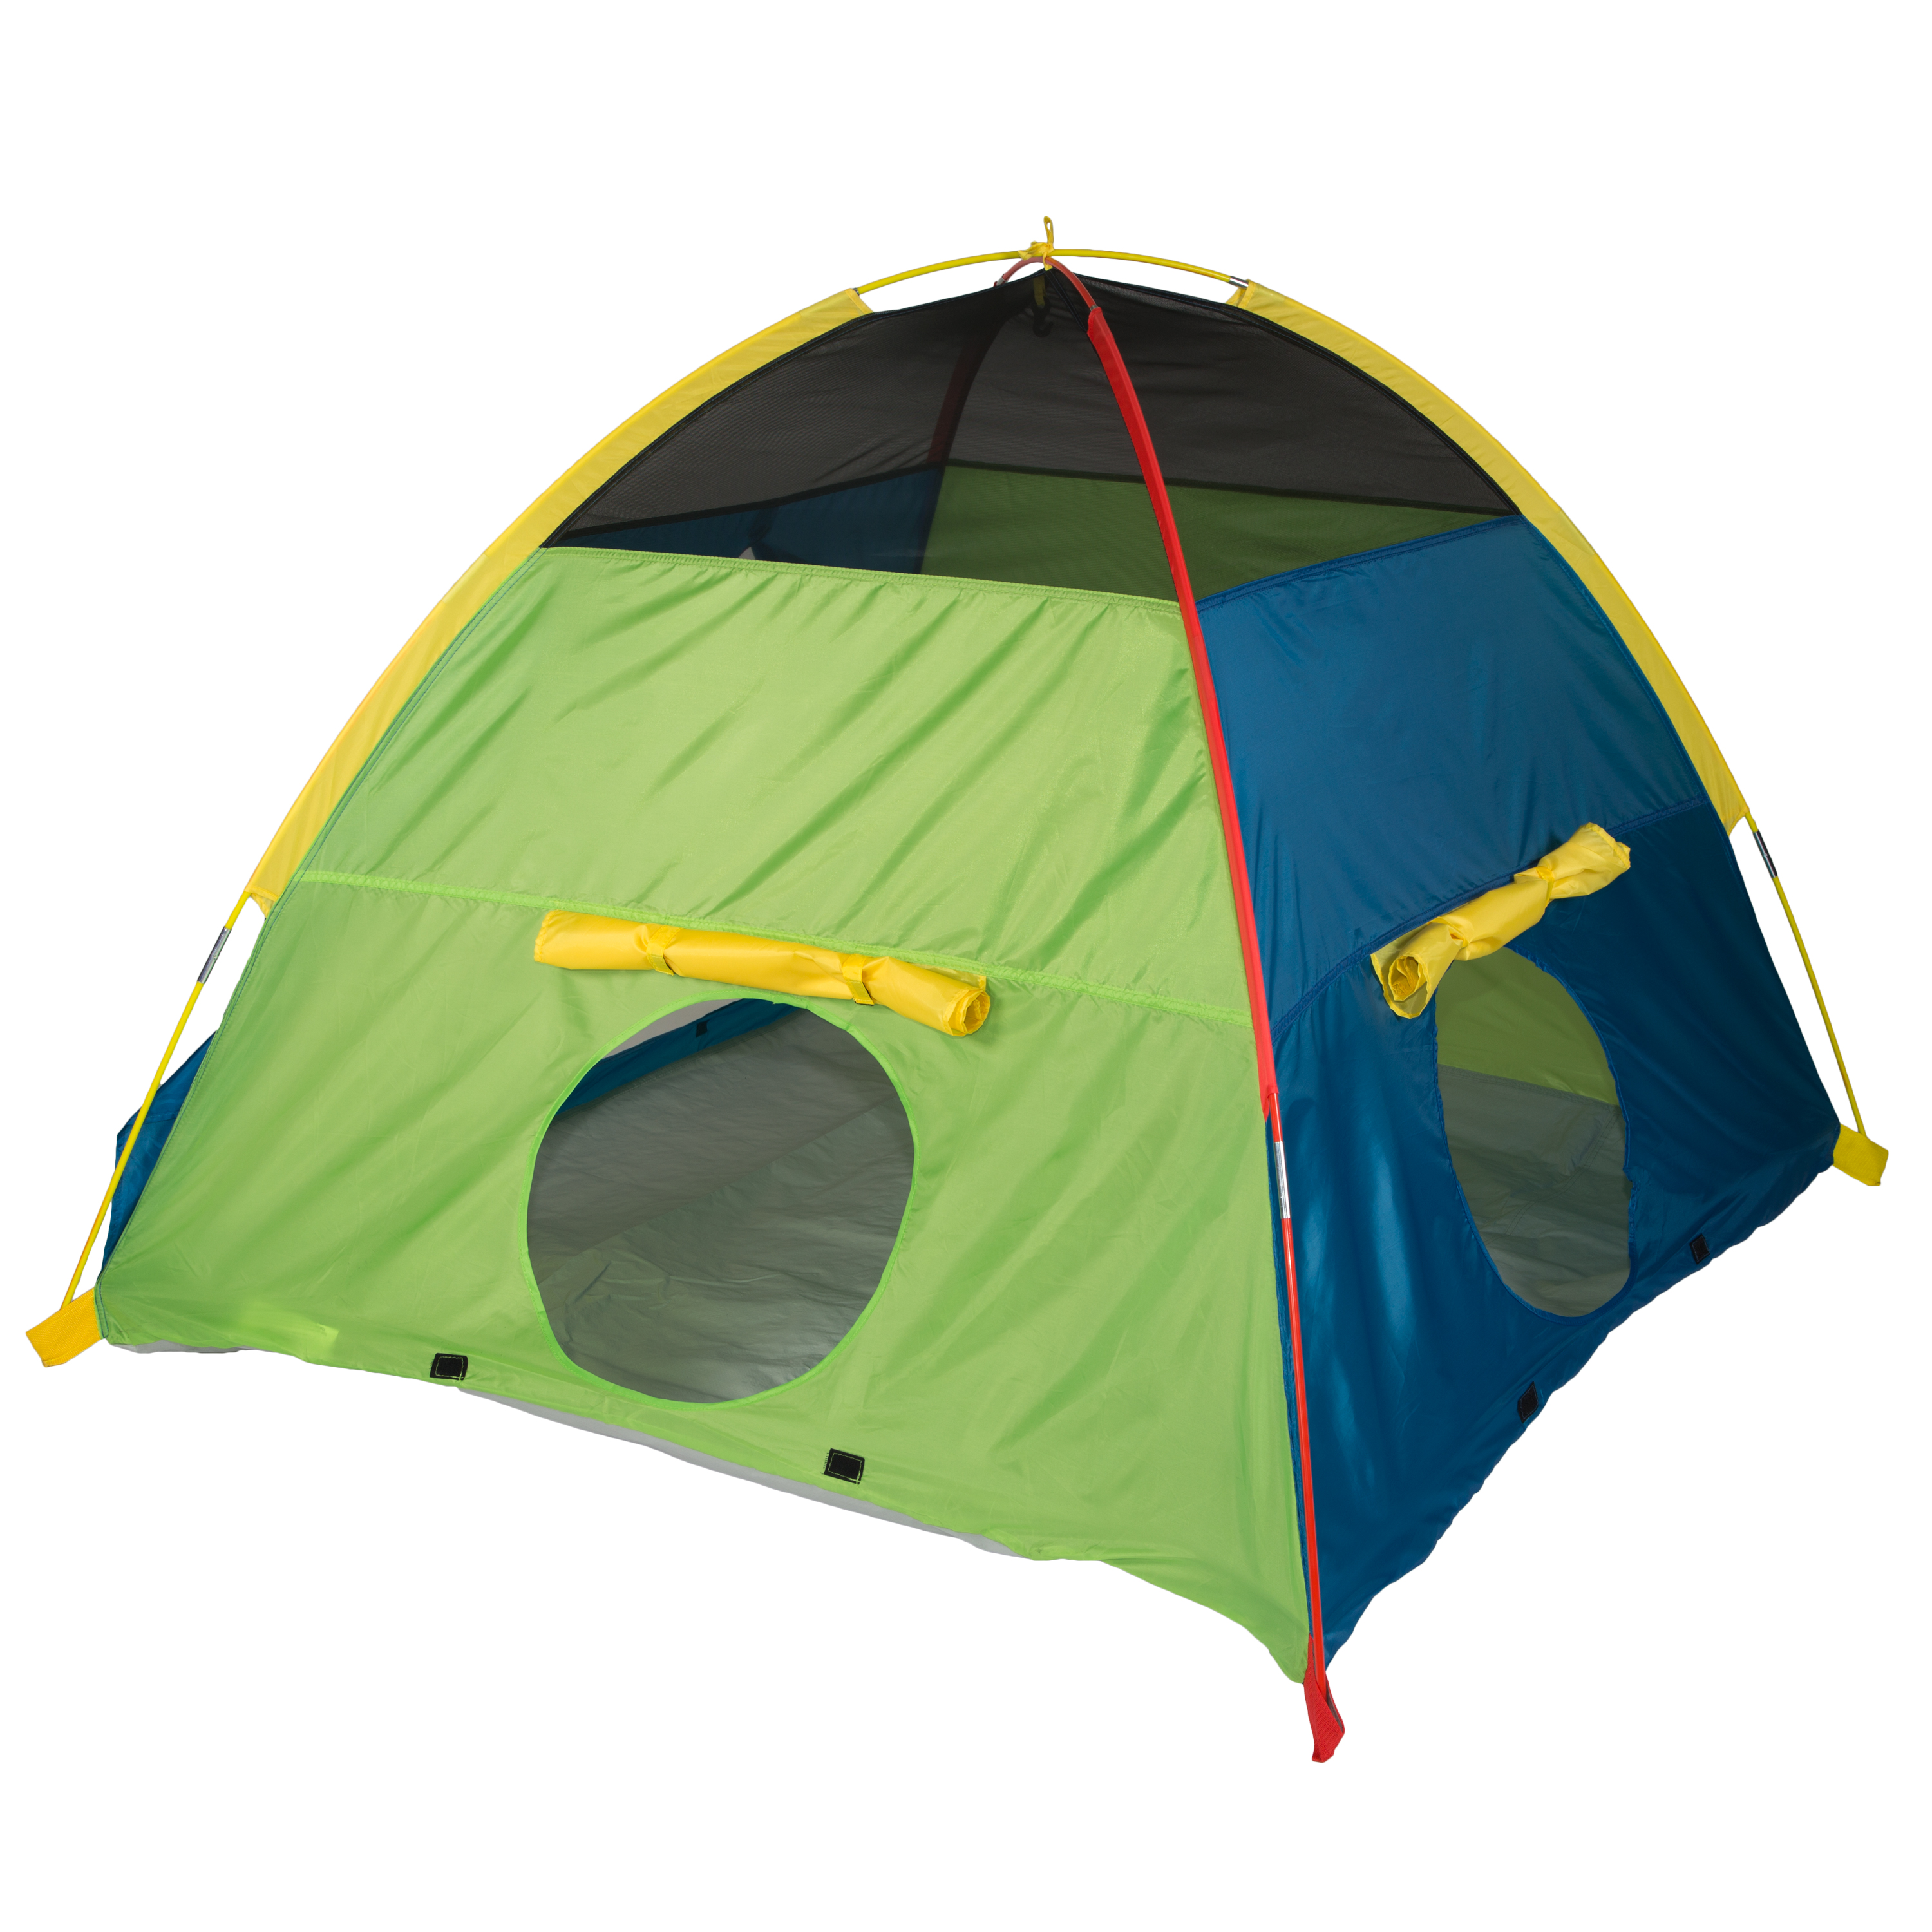 Pacific Play Tents Super Duper 4 Kid Play Tent - image 3 of 21